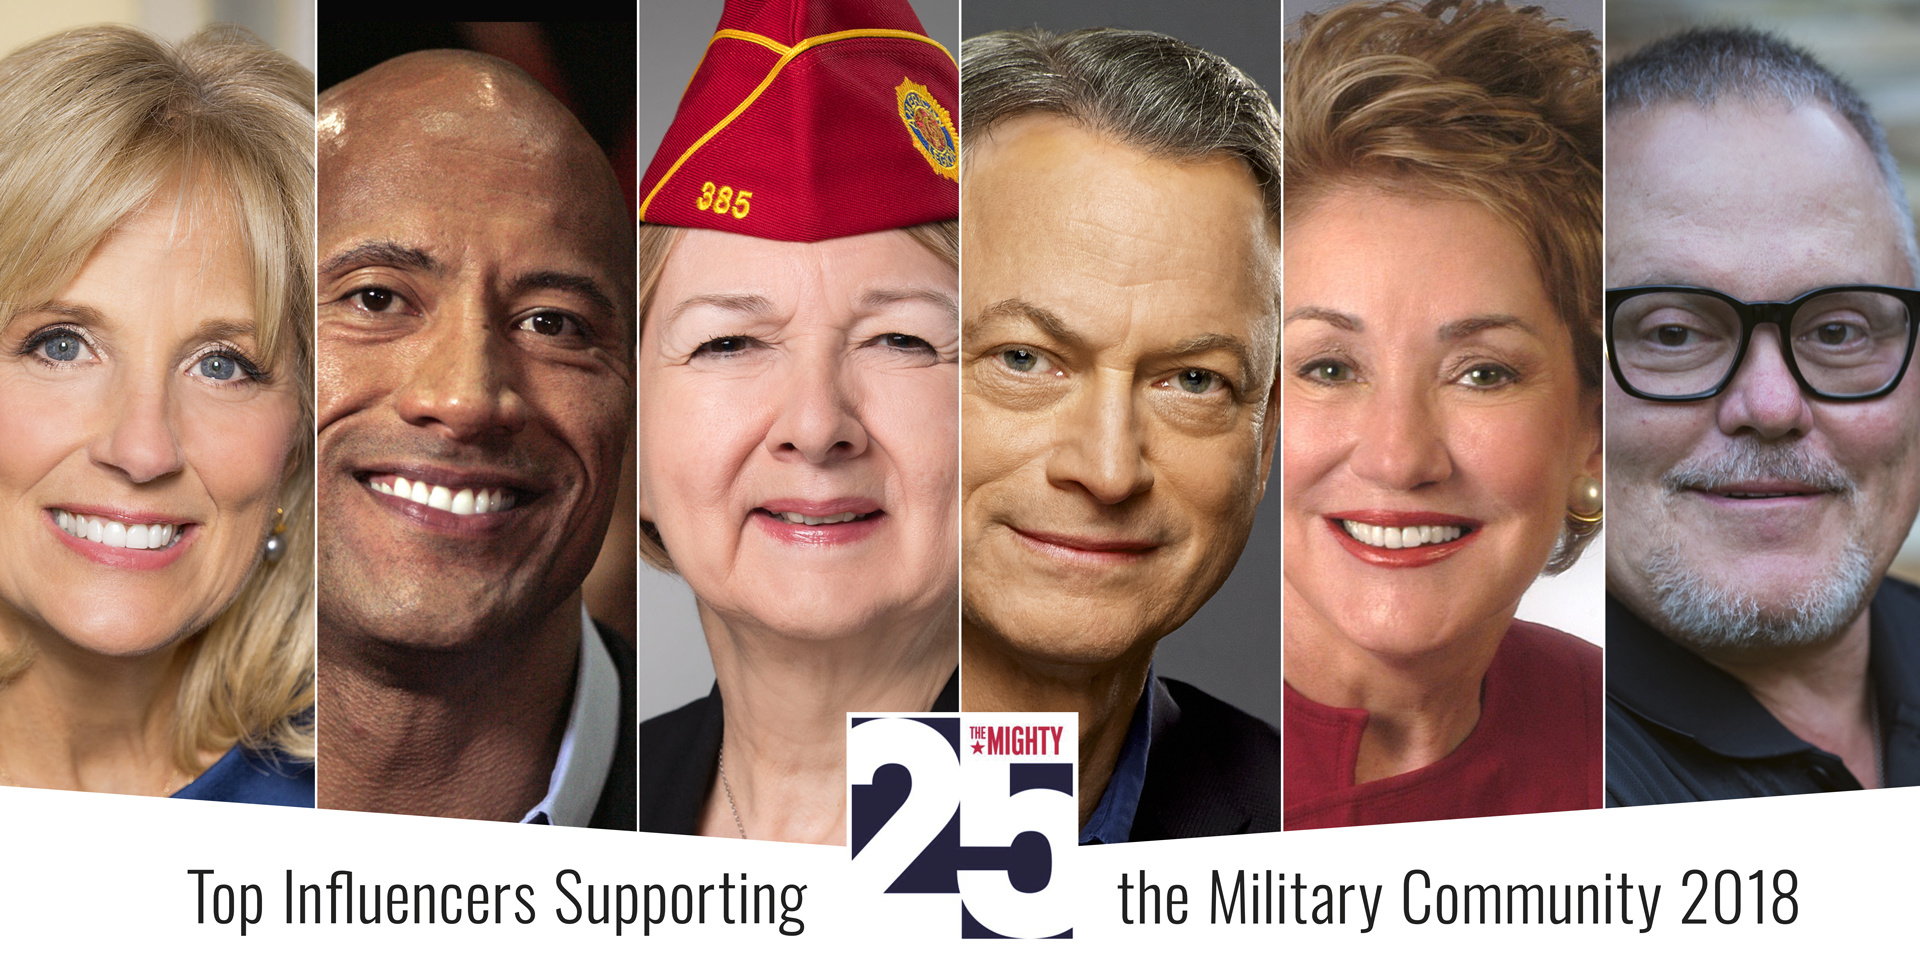 Gary Sinise supports vets by walking the walk and rocking the rock